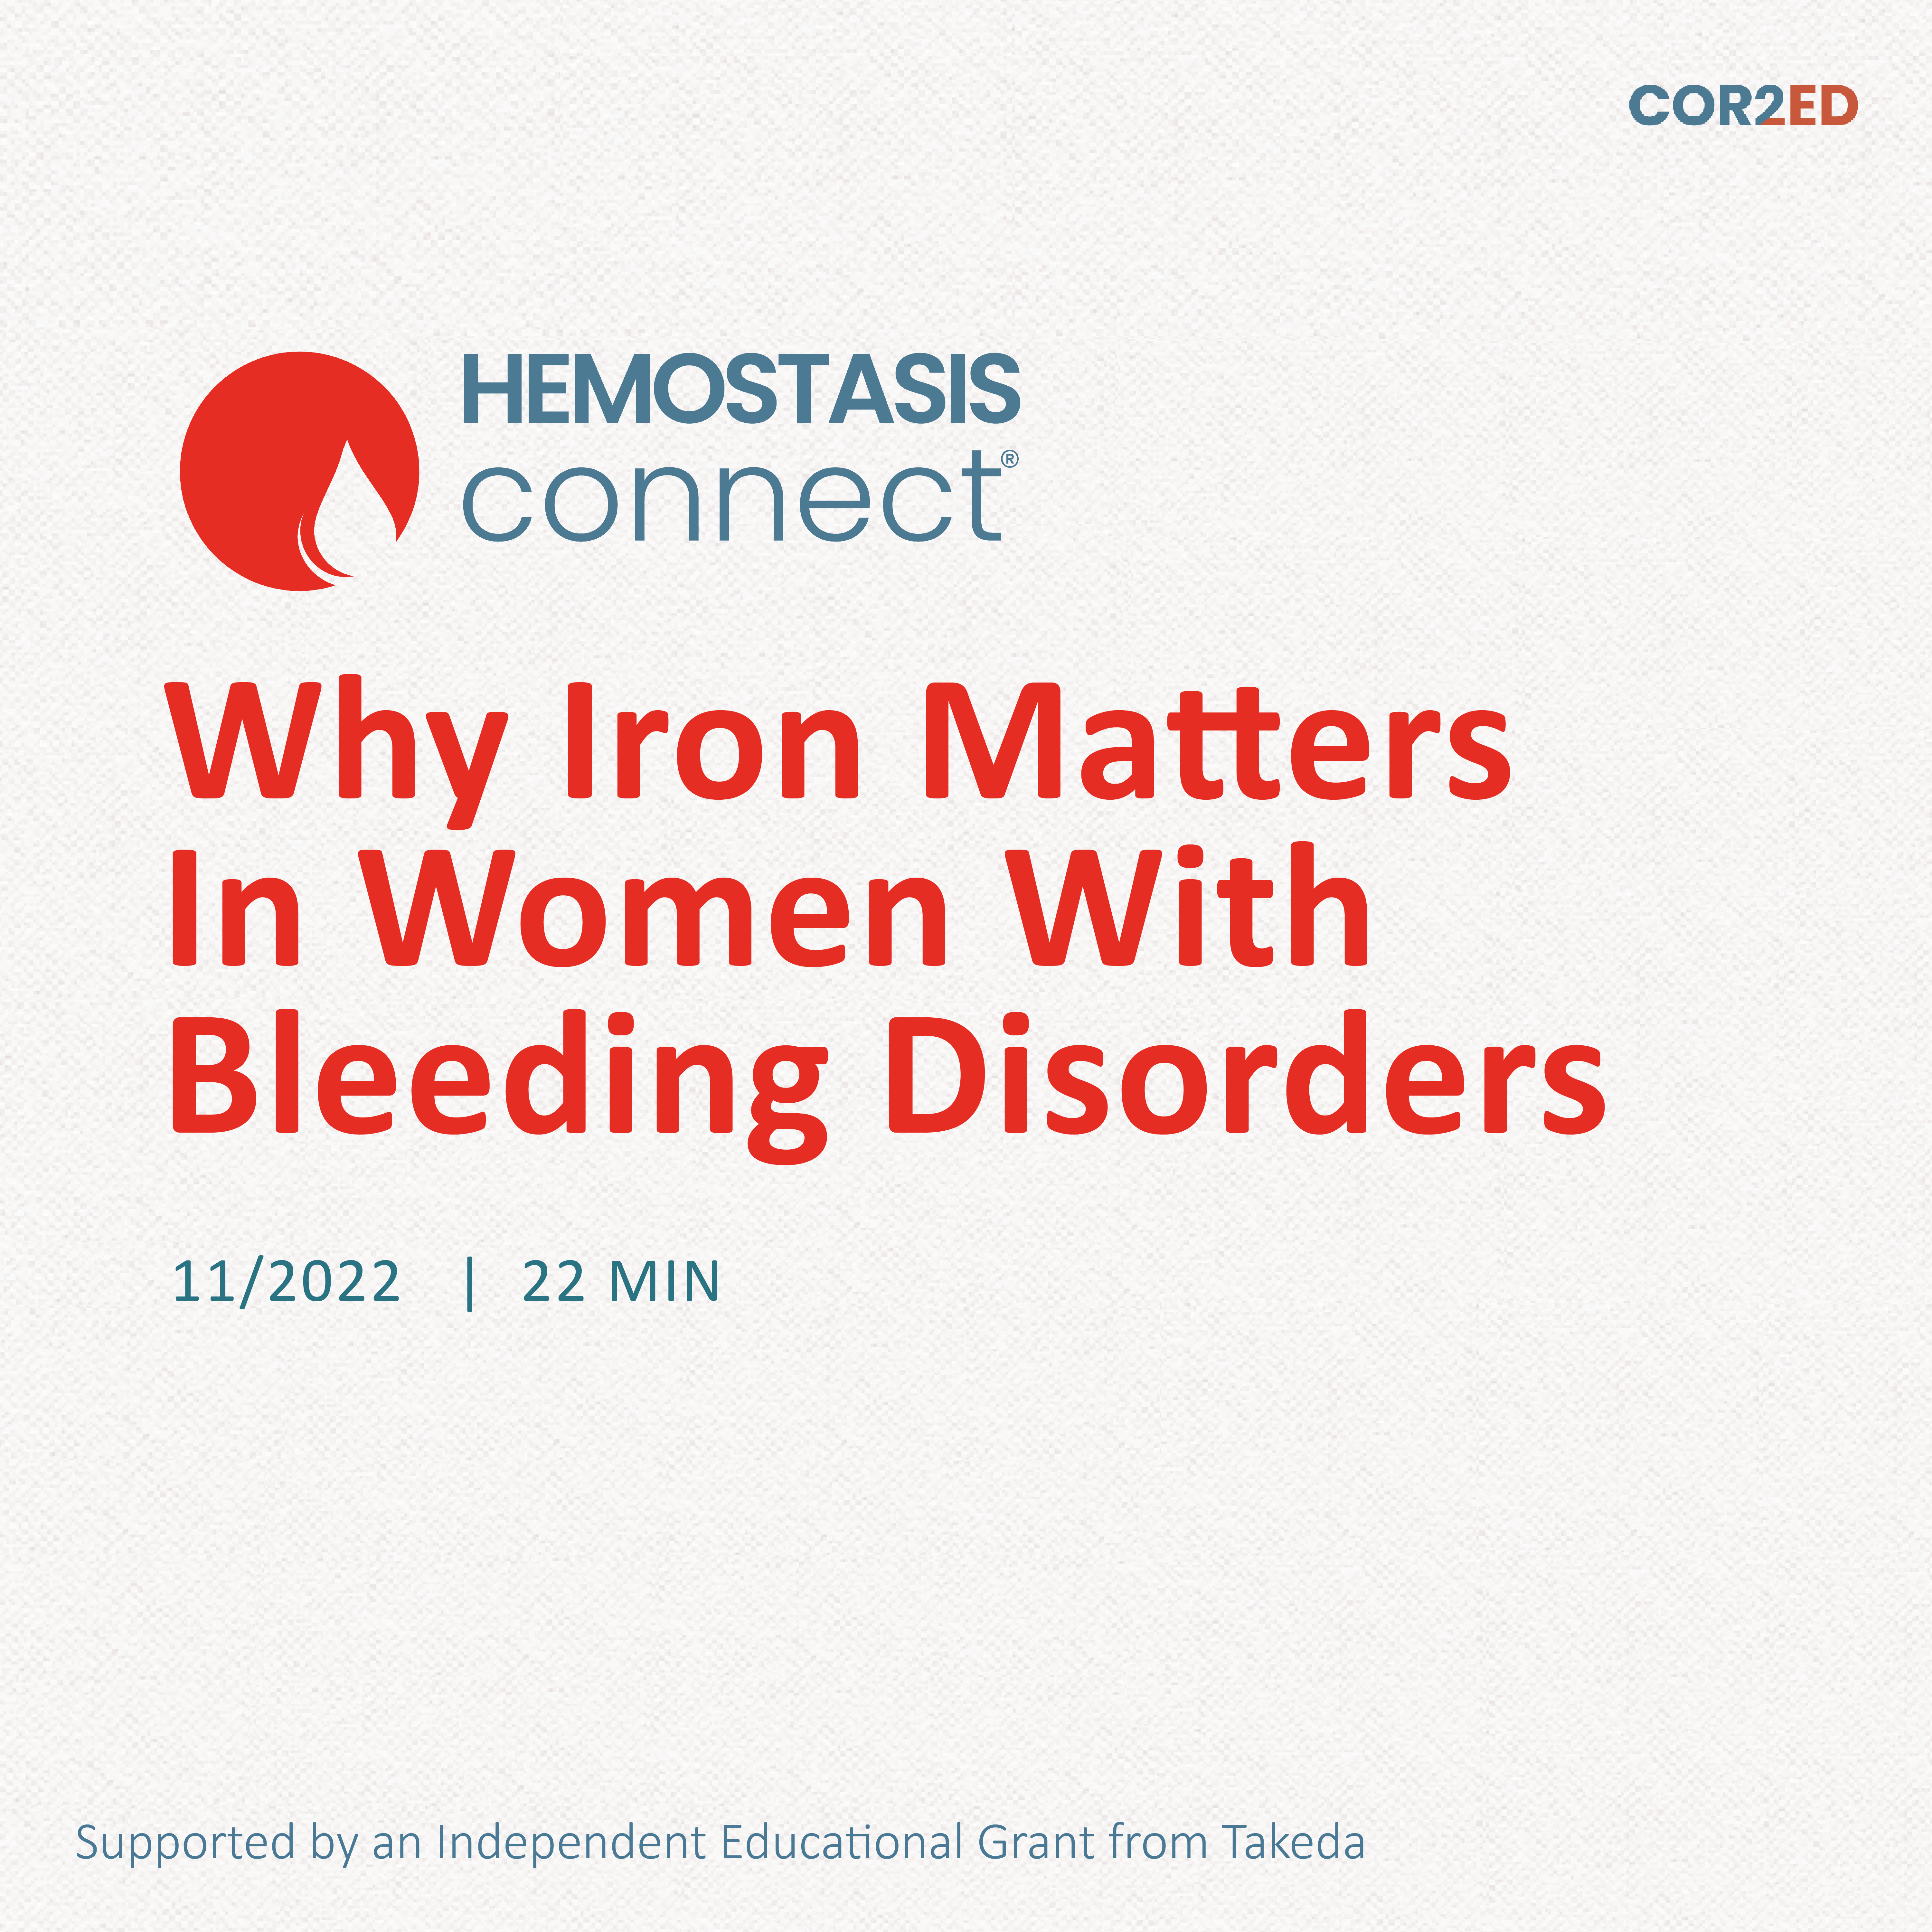 Why iron matters in women with bleeding disorders